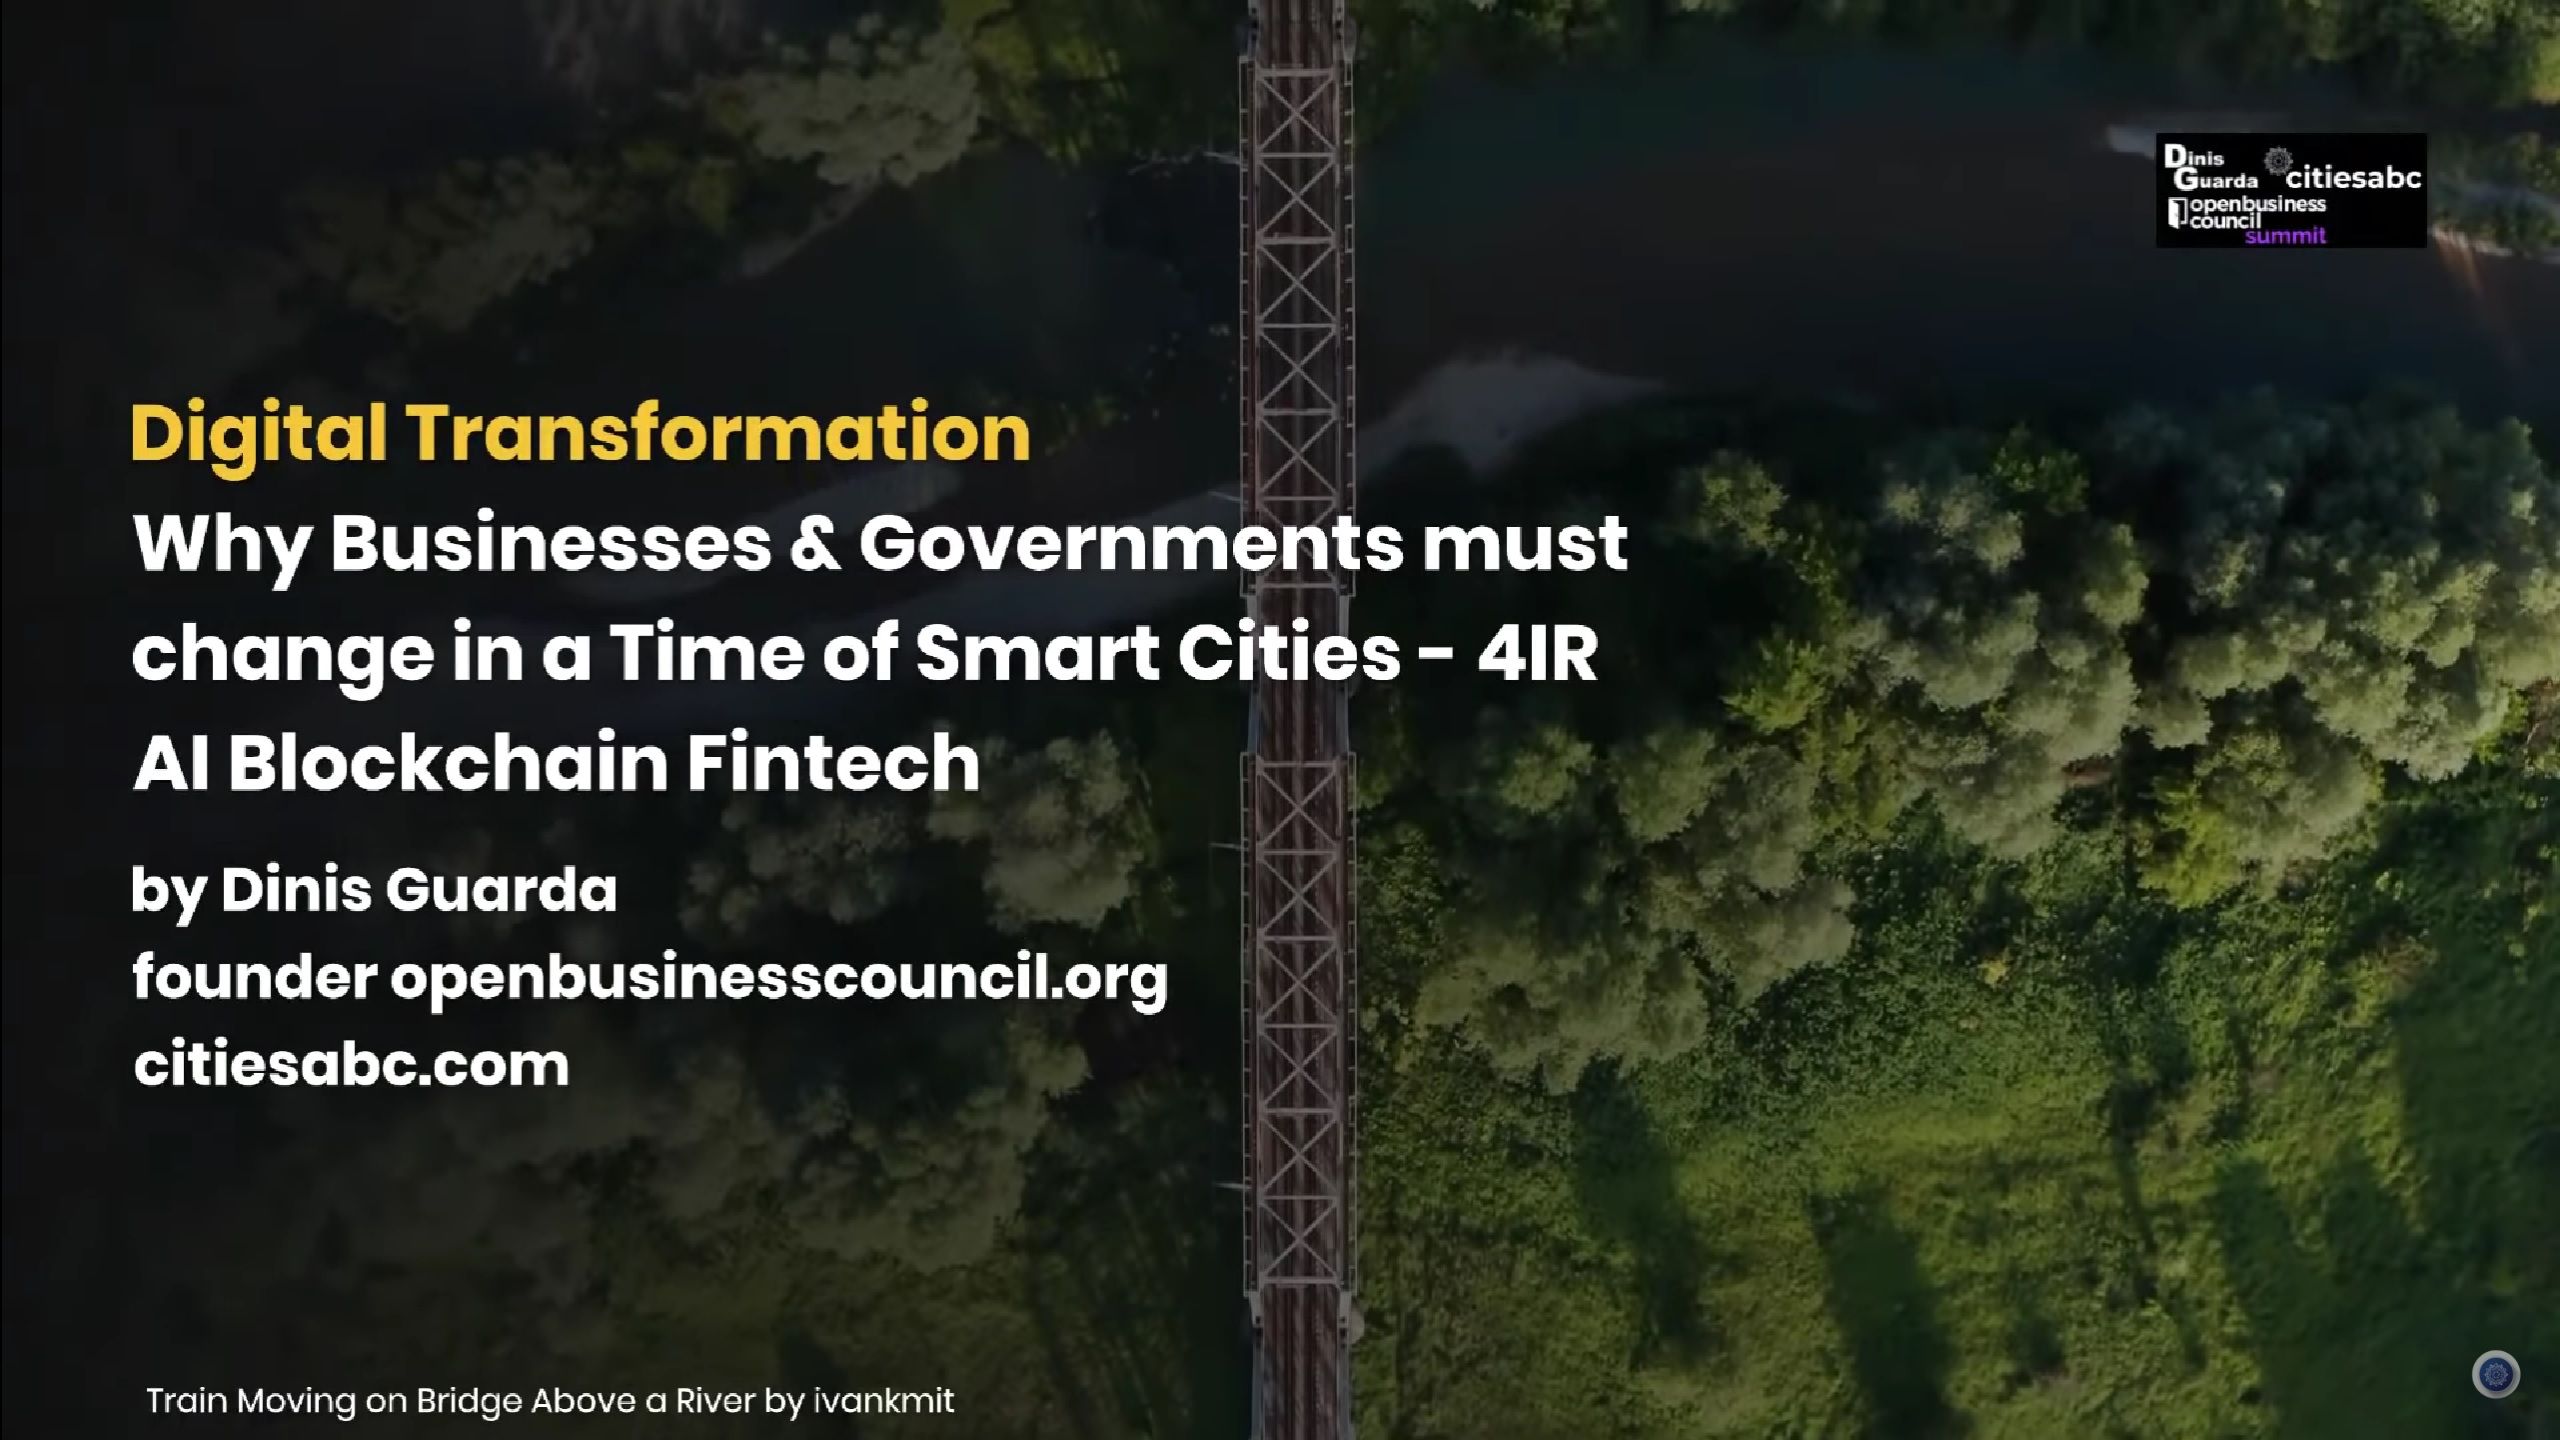 Digital Transformation: Why Businesses & Governments Must Change with Smart Cities 4IR AI Blockchain